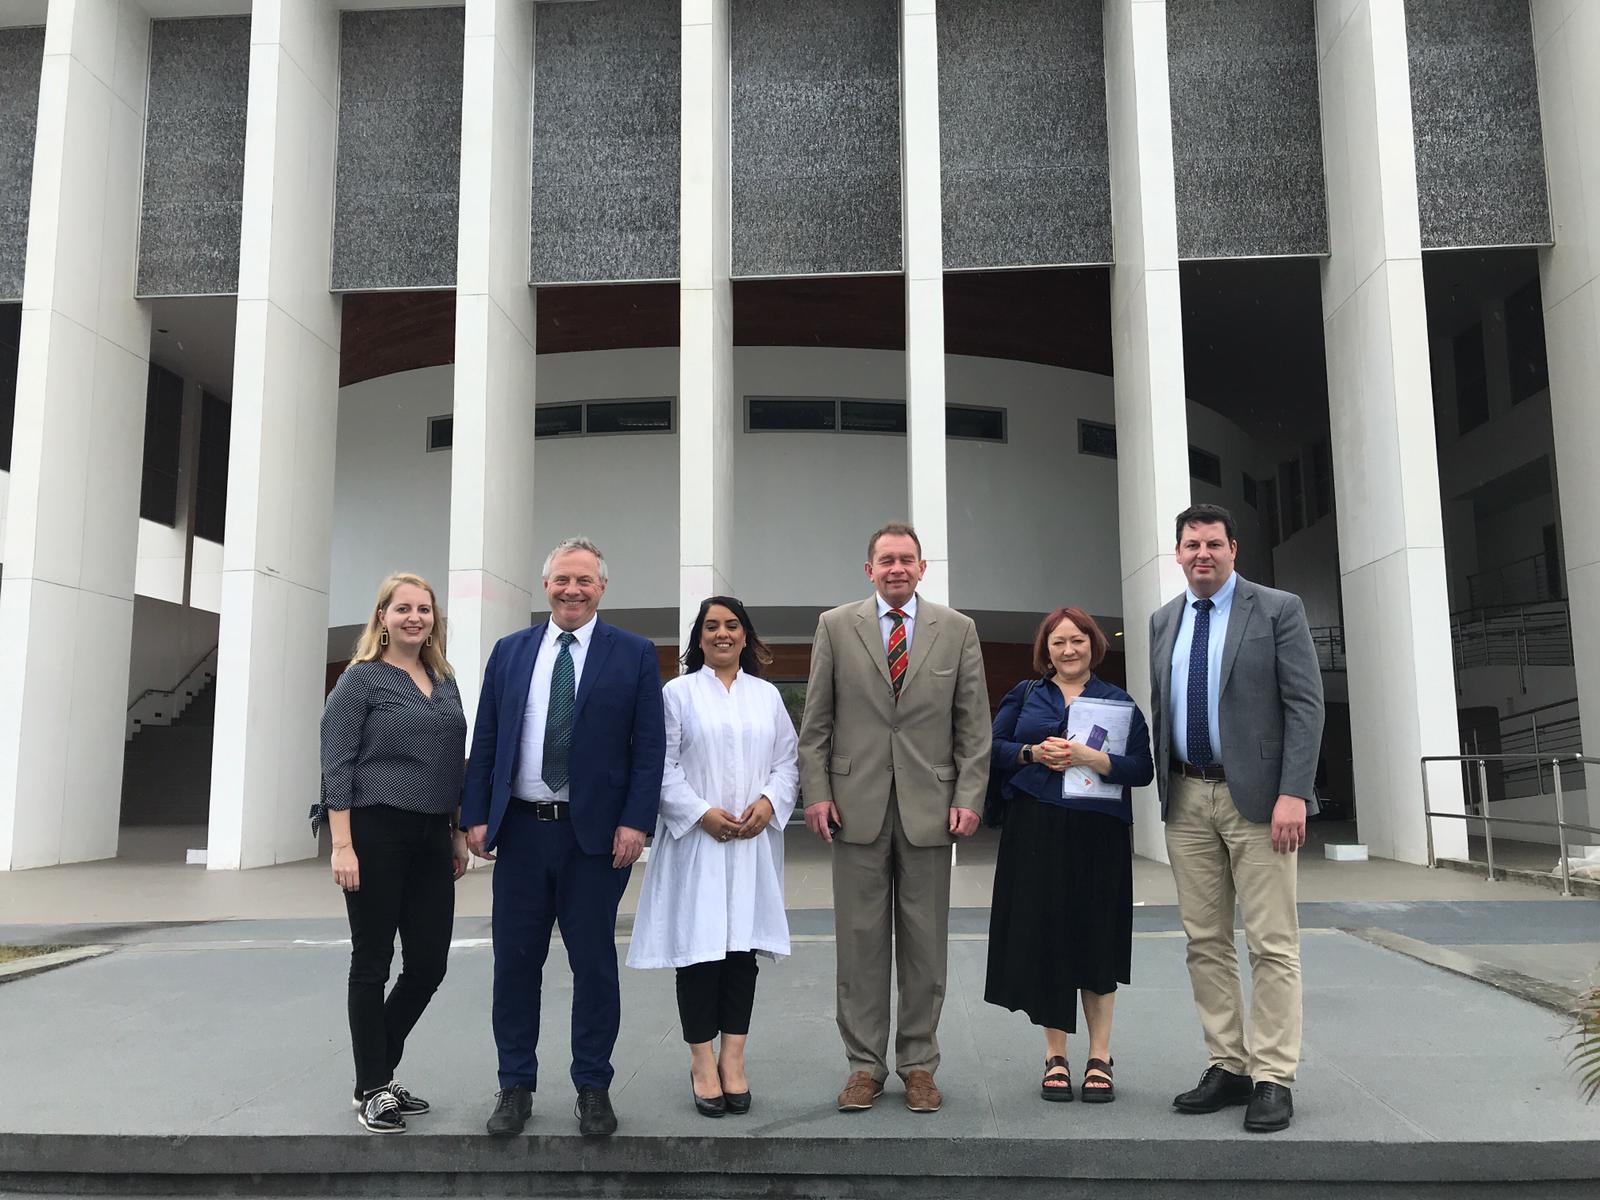 The CPA UK delegation in front of the Parliament of Grenada. The new building was opened in 2018.